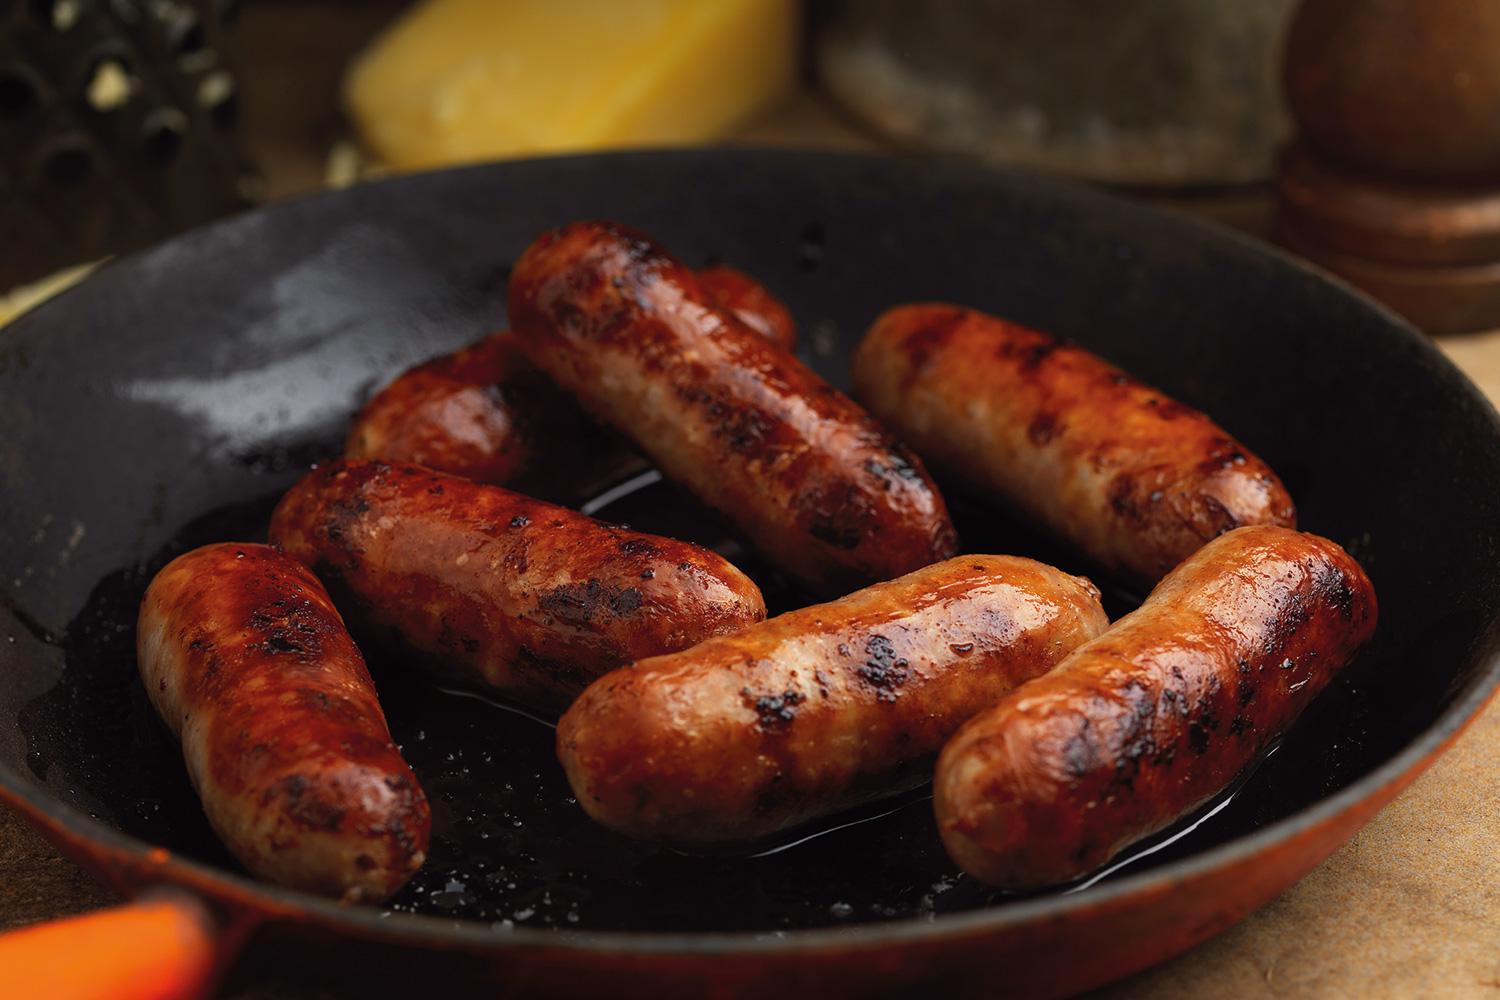 Cheese Smoked Bacon Sausages - Sausages Black Pudding